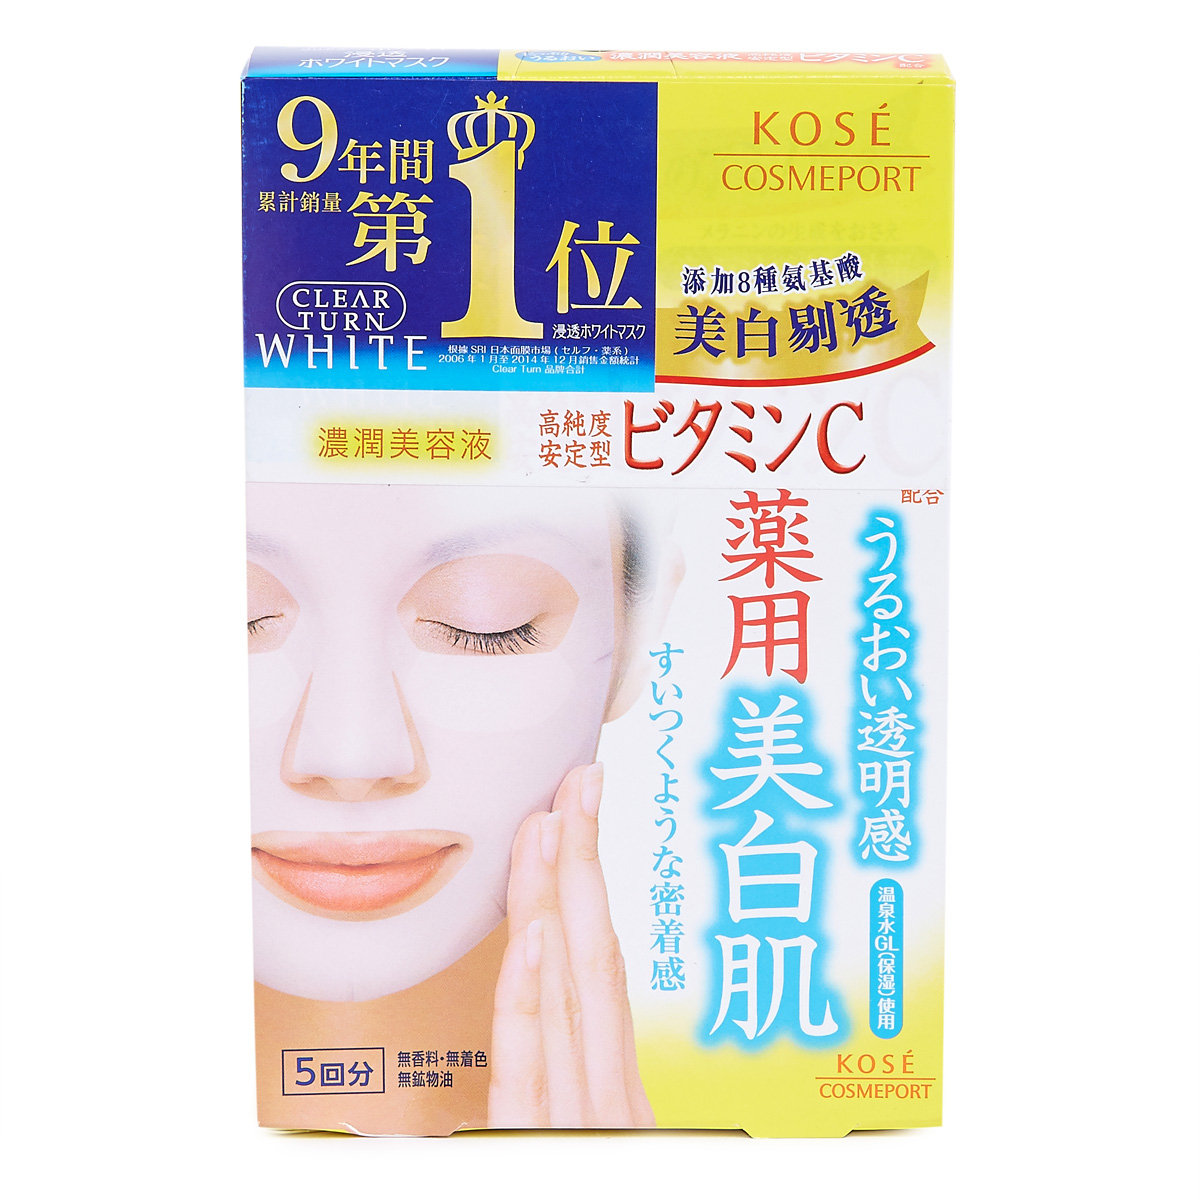 Kose Clear Turn Hyaluronic Acid White Mask Limited Pack